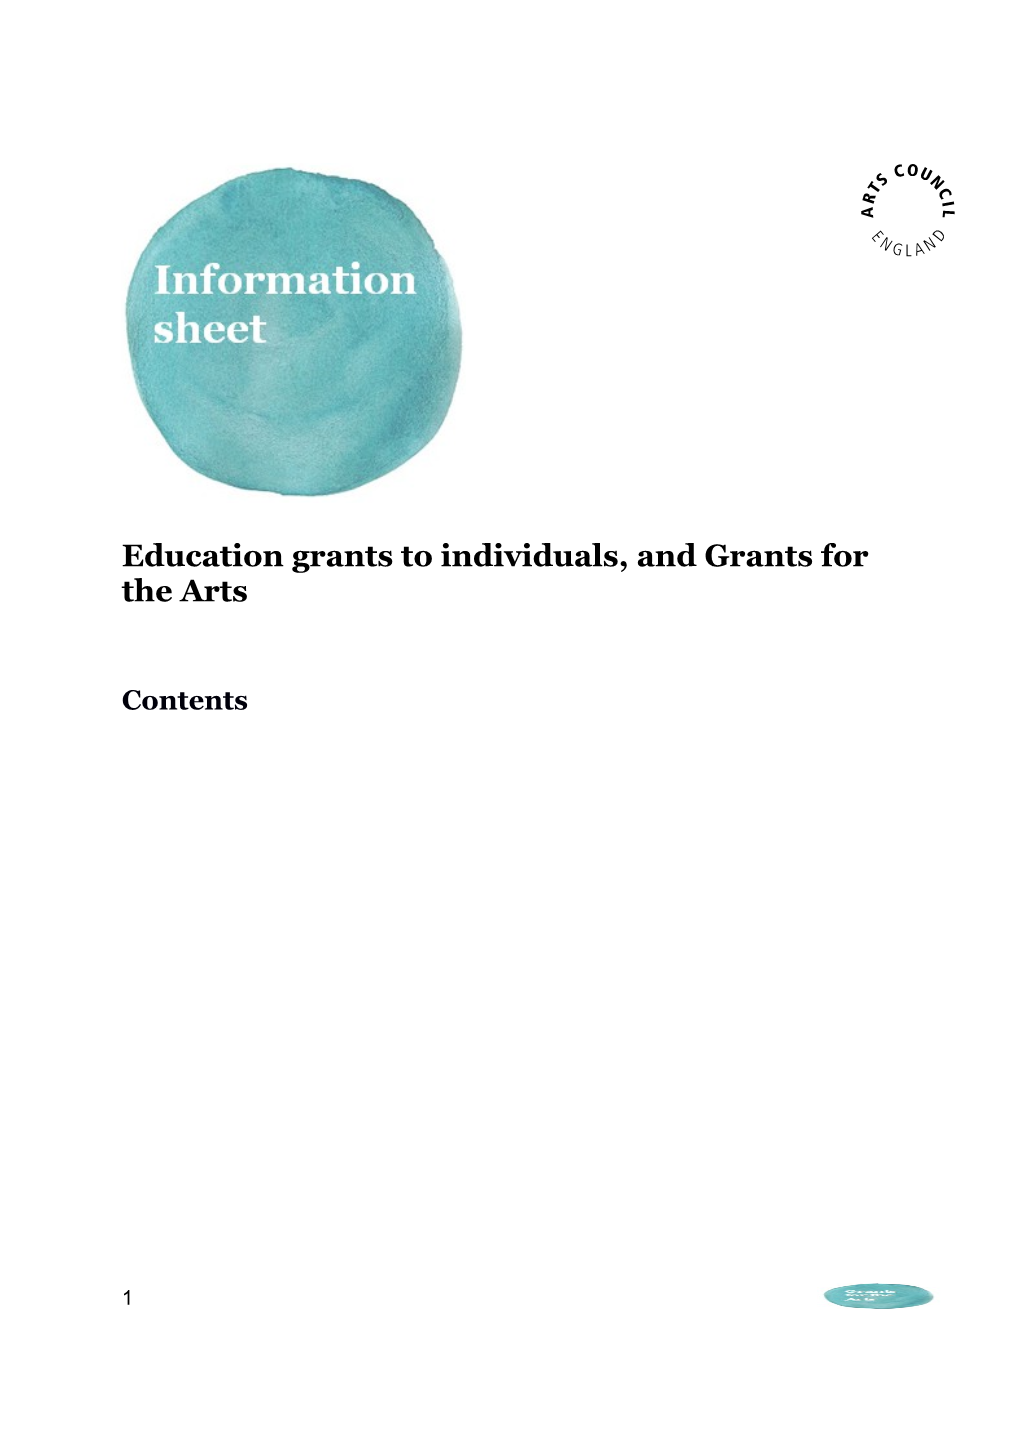 Education Grants to Individuals, and Grants for the Arts